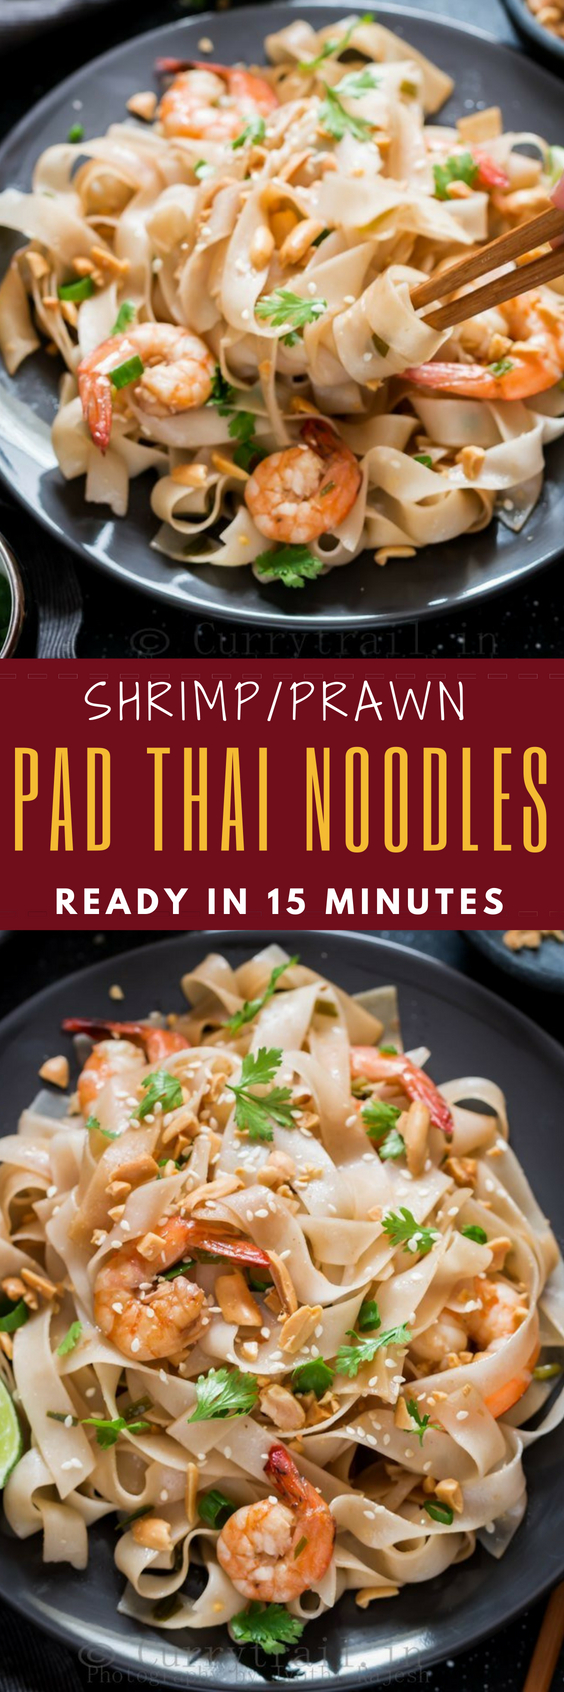 You guys won’t believe how delicious this healthy shrimp pad Thai noodles recipe is! And you know what, you can make it in 15 minutes with all BIG flavors. Fresh, bold flavors from Thai cuisine is to die for. You'll love all the flavors in this Pad Thai!